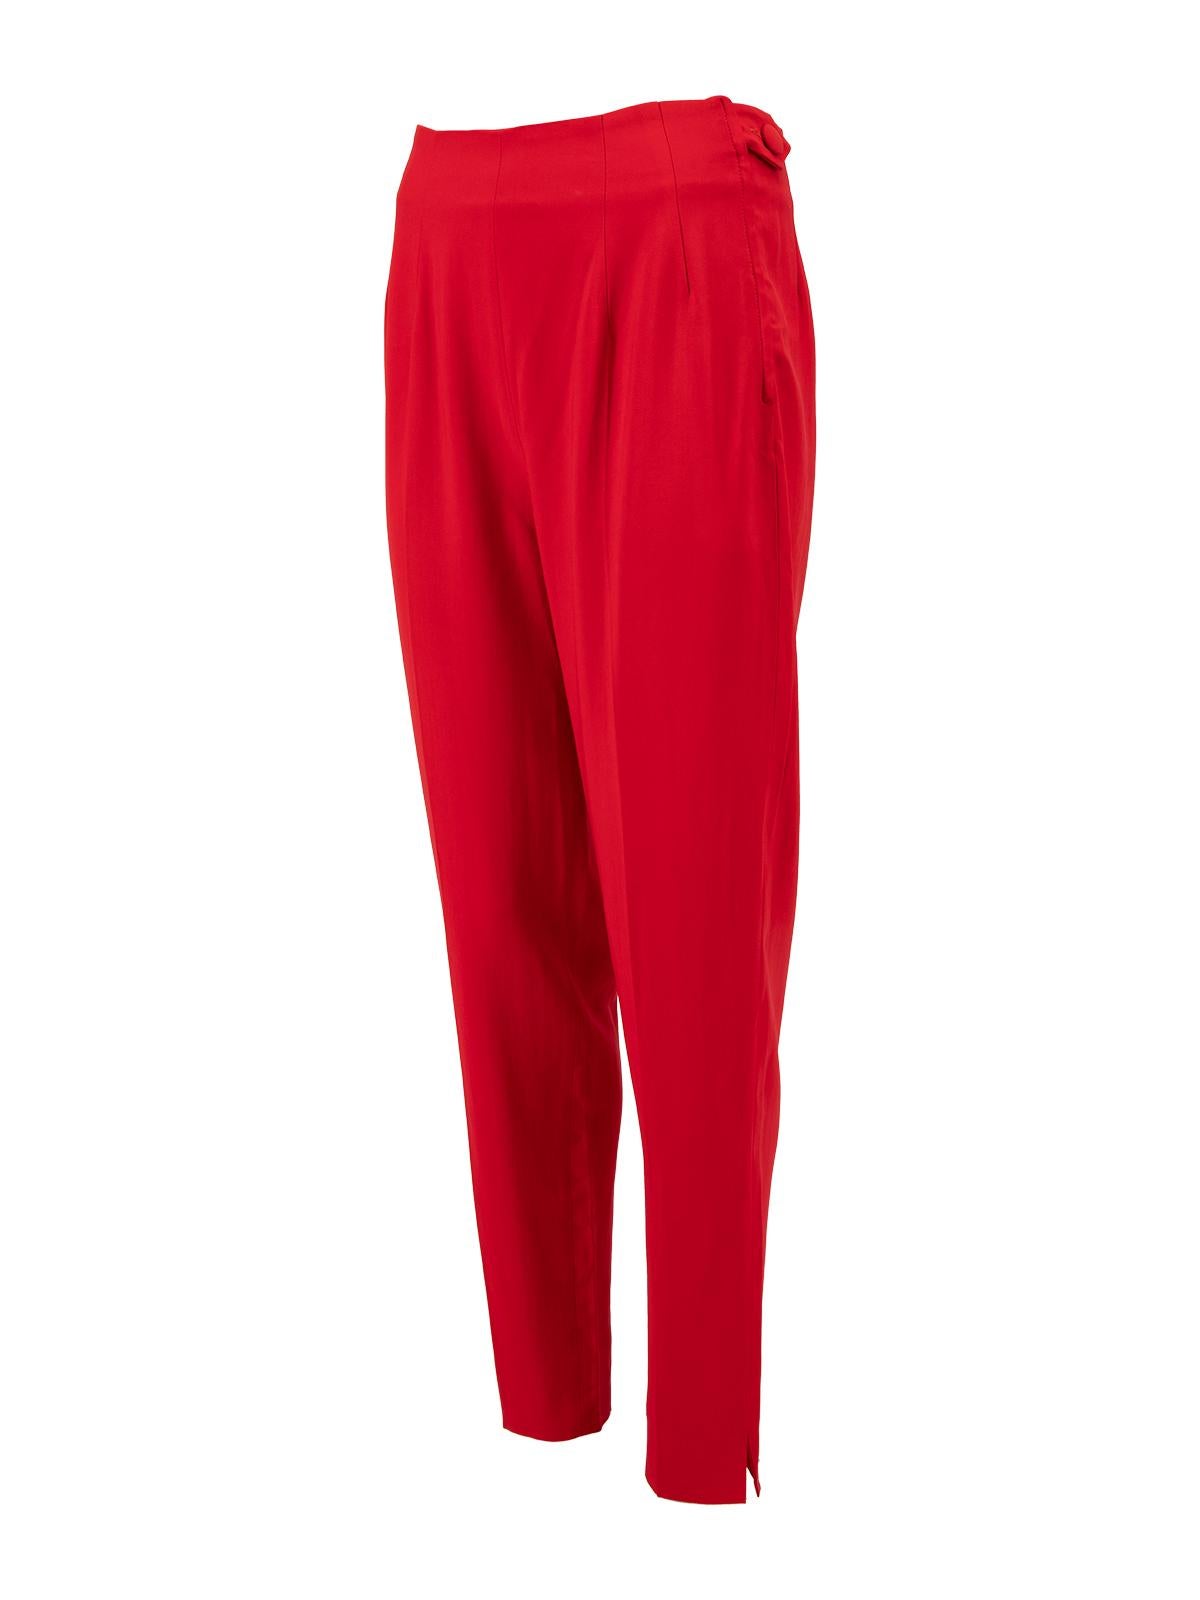 Pre-Loved Moschino Couture Women's Vintage Red High Waisted Straight Leg Trouser 1